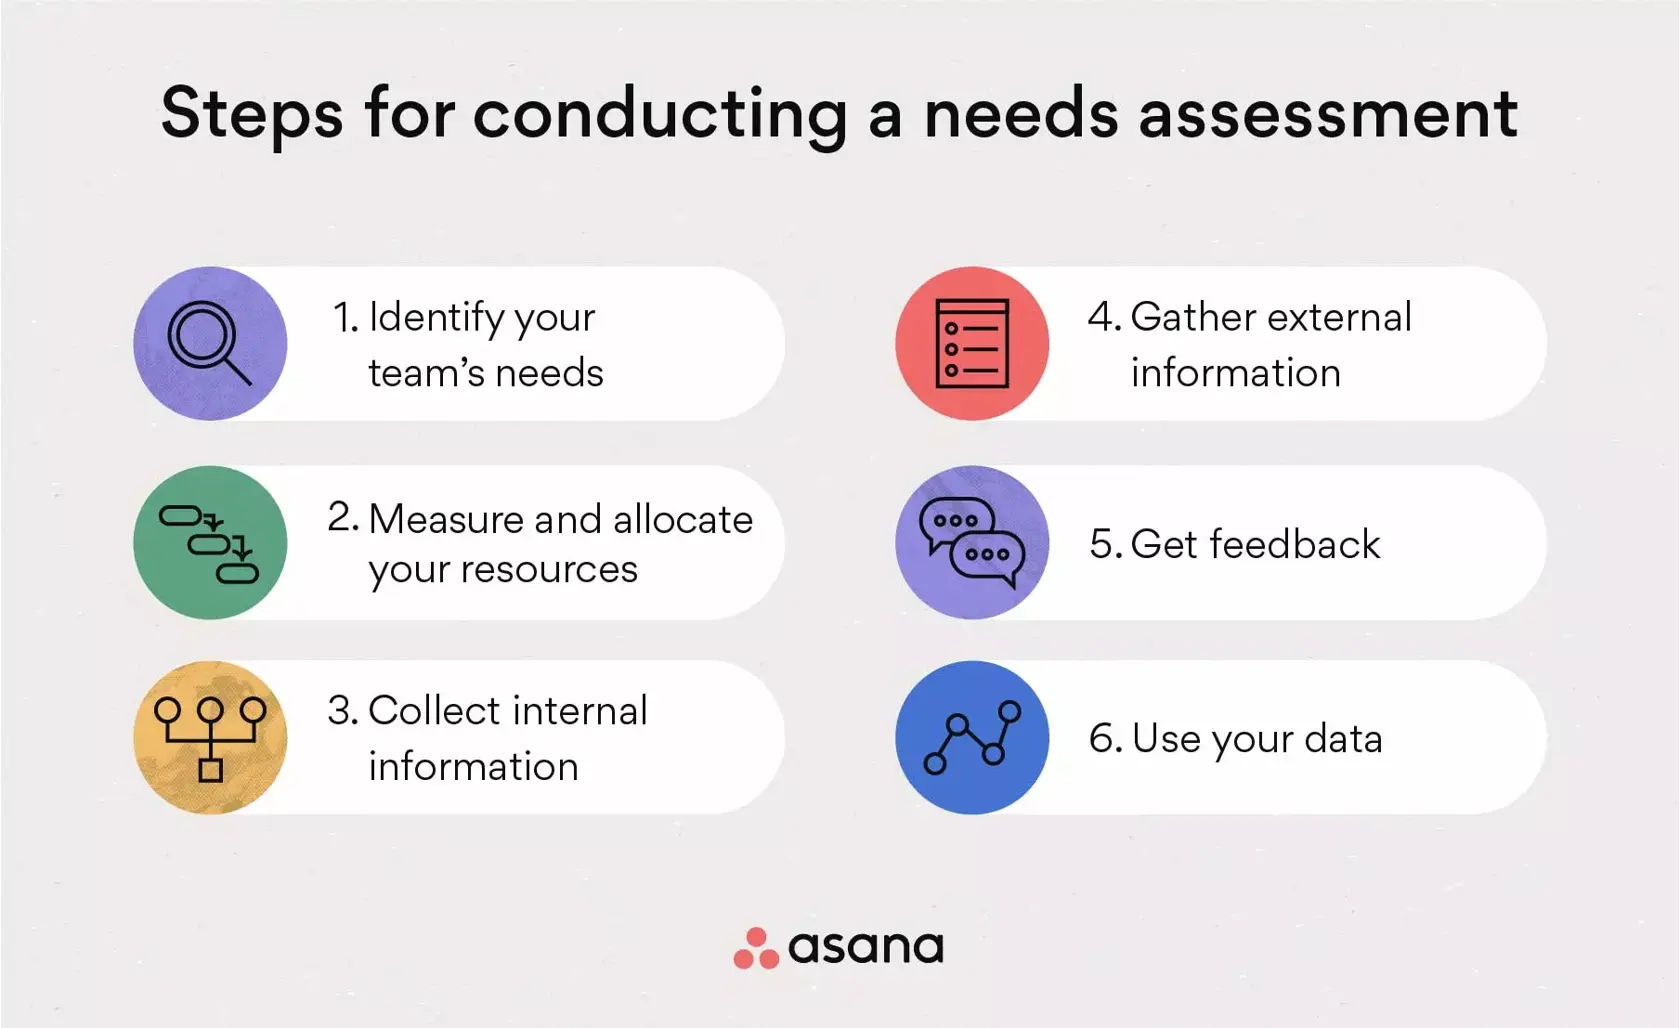 [inline illustration] Steps for conducting needs assessment (infographic)